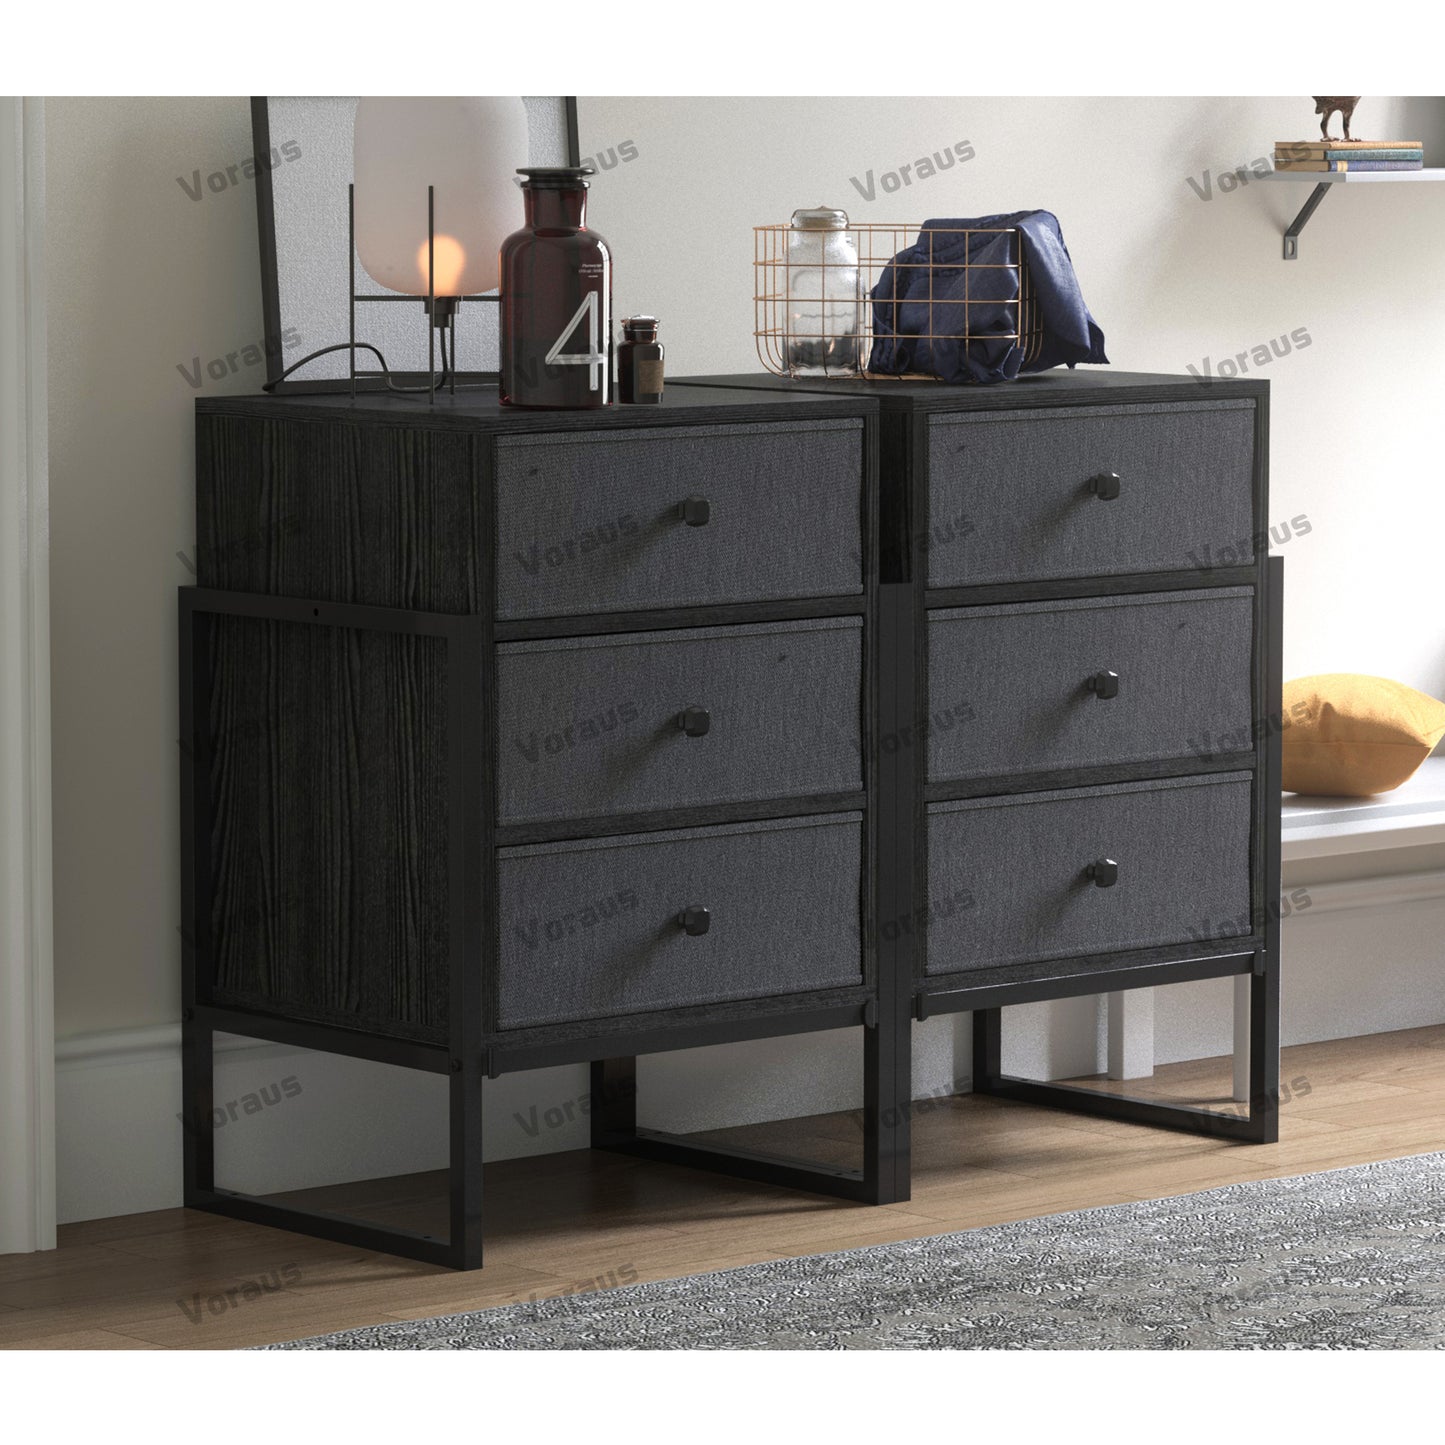 Patent style Adjustable Building Block Storage Cabinet with Non woven fabric drawer